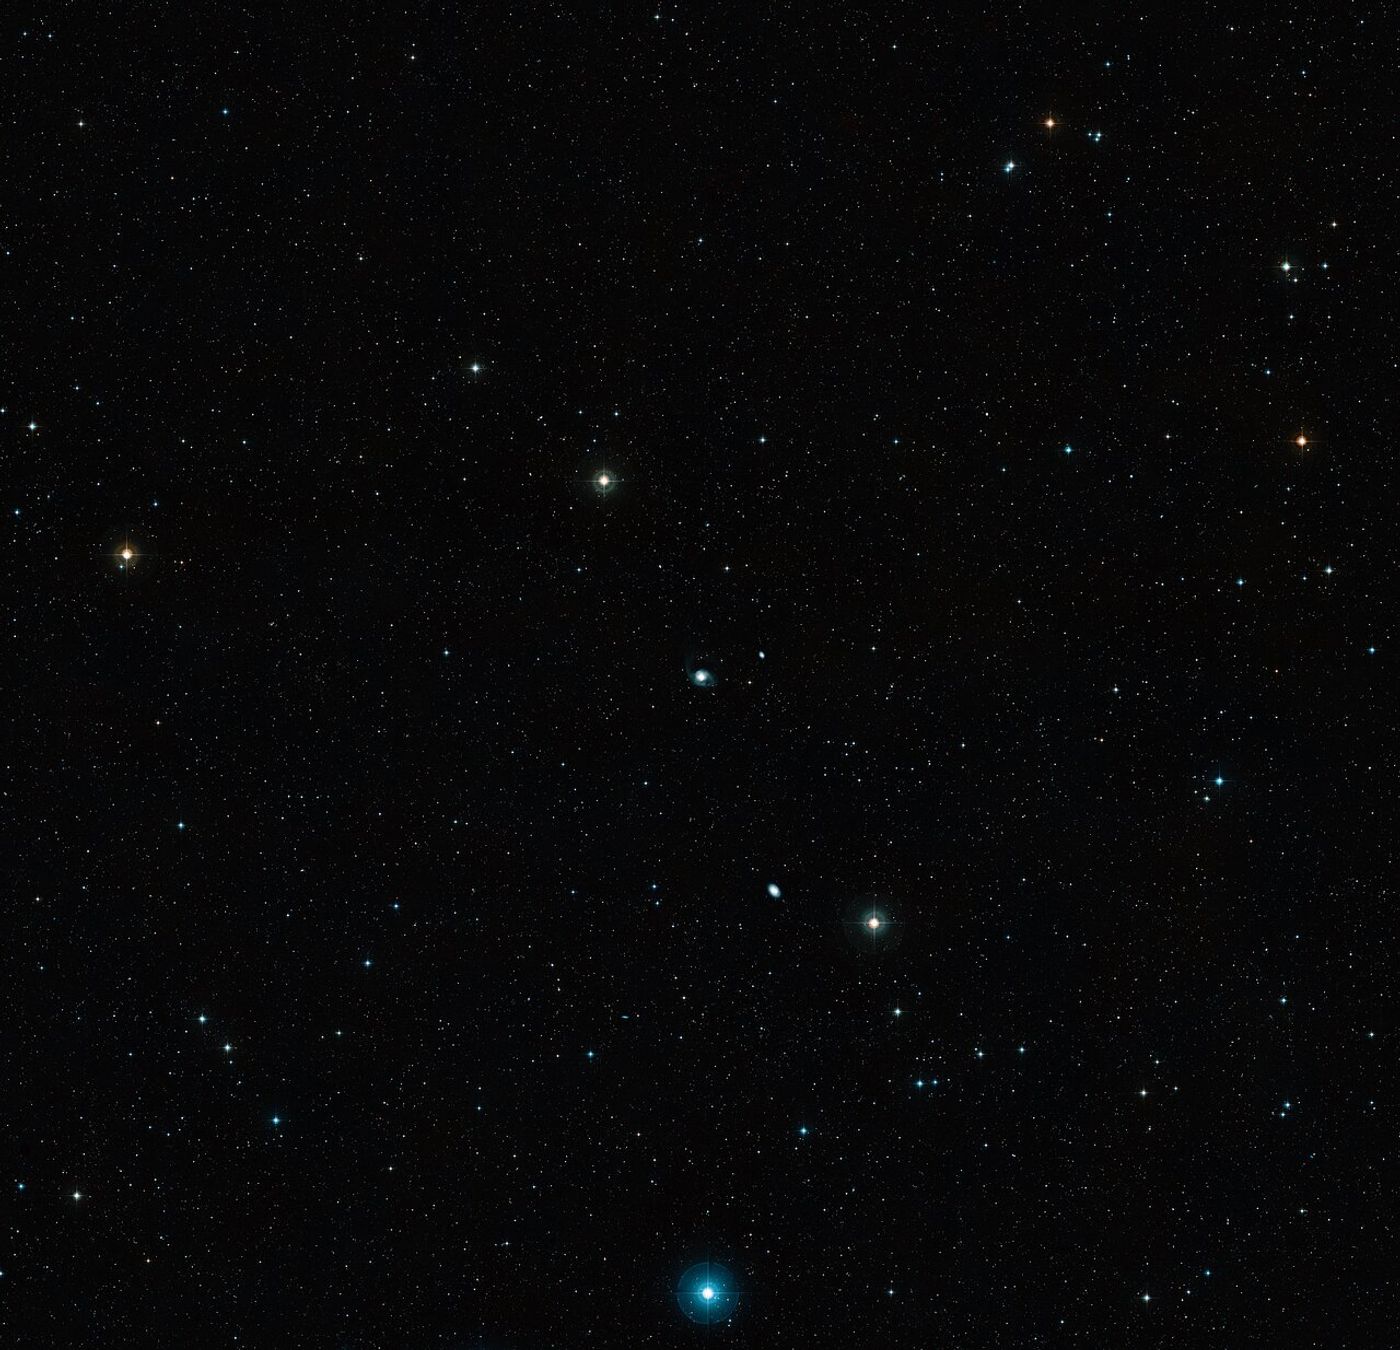 A zoom-out of the dual SMBH system. Galaxy 7727 is directly in the middle of the image.